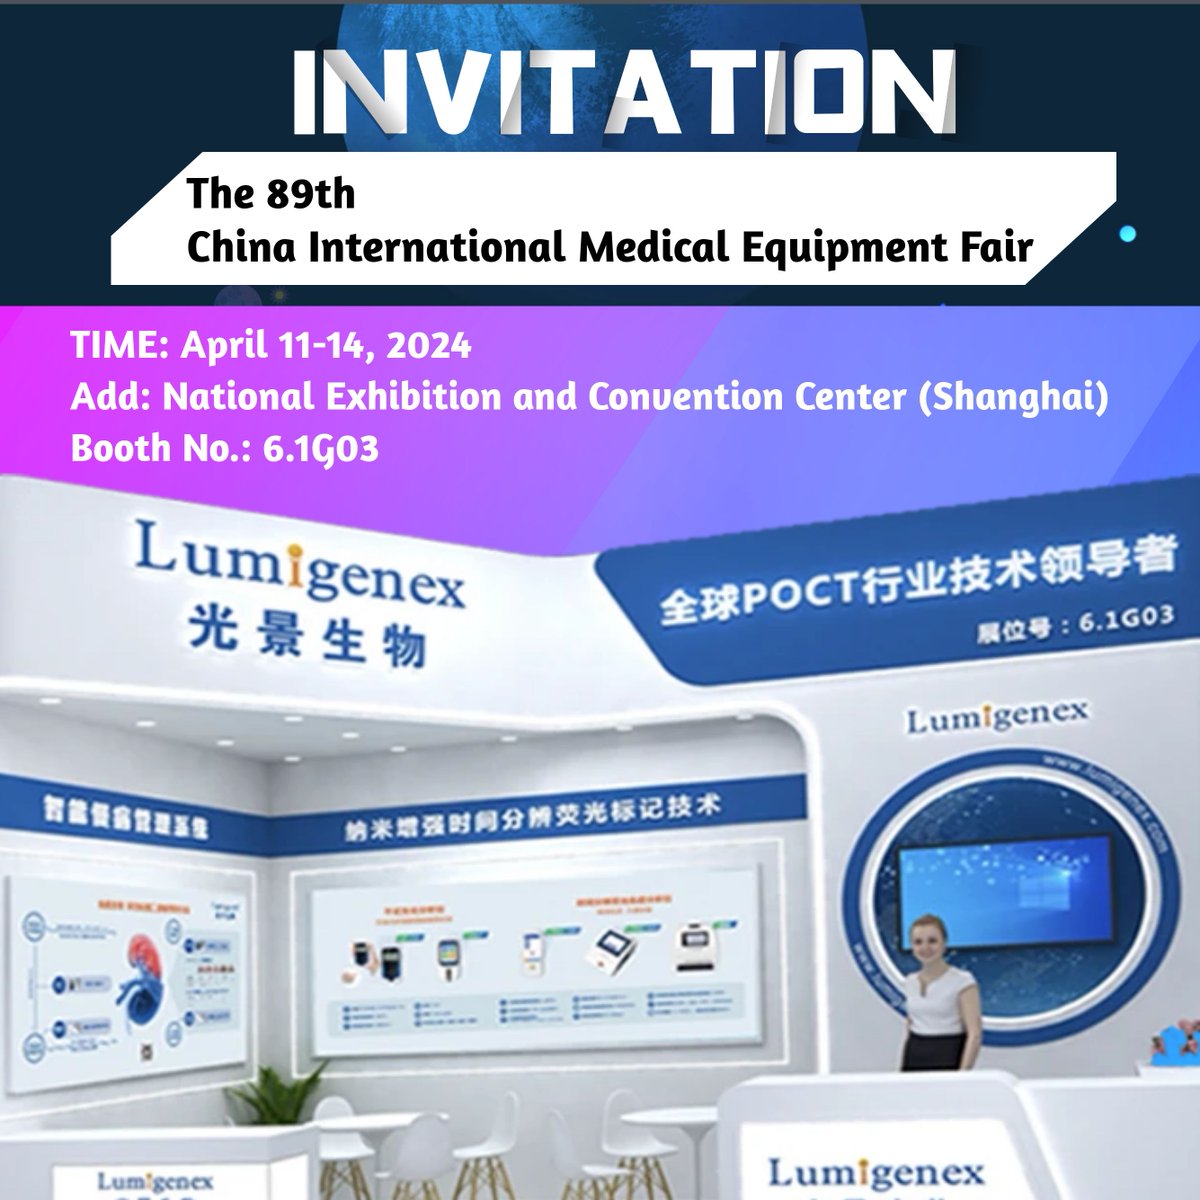 Join Lumigenex - Hall6.1 G03 at #CMEF Spring 2024. 
Let' s Meet in Shanghai National Exhibition & Convention Center.

#cmef2024 #exhibition #shanghai